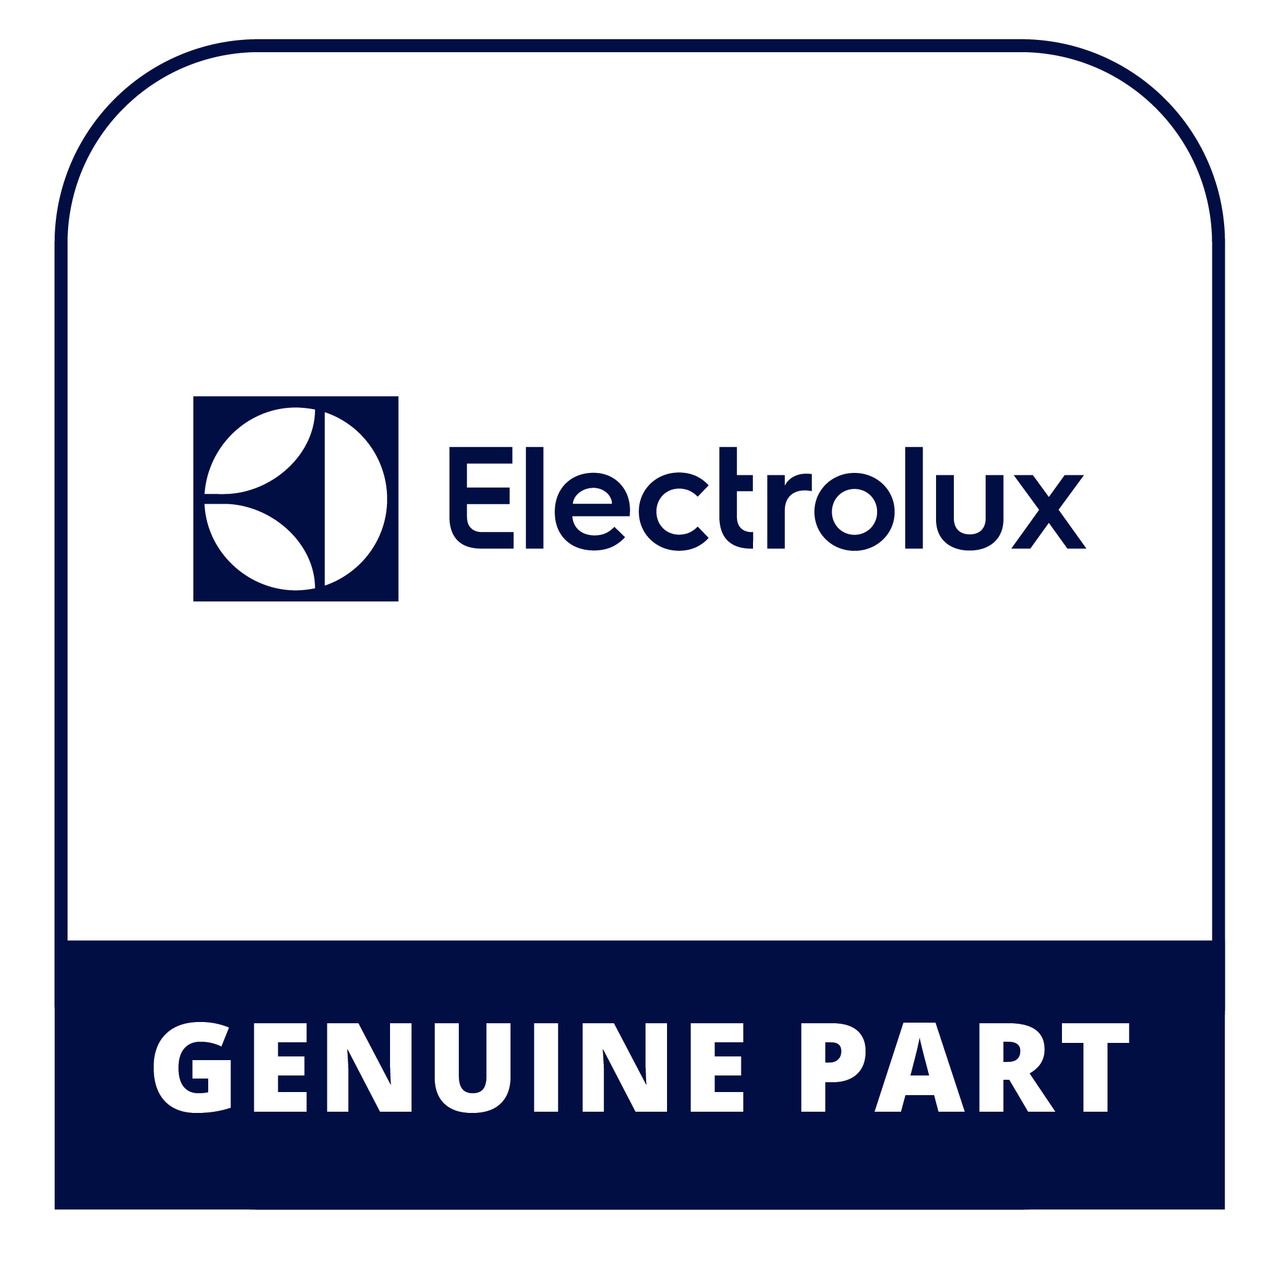 Frigidaire - Electrolux 318205327 Owners Manual - Genuine Electrolux Part